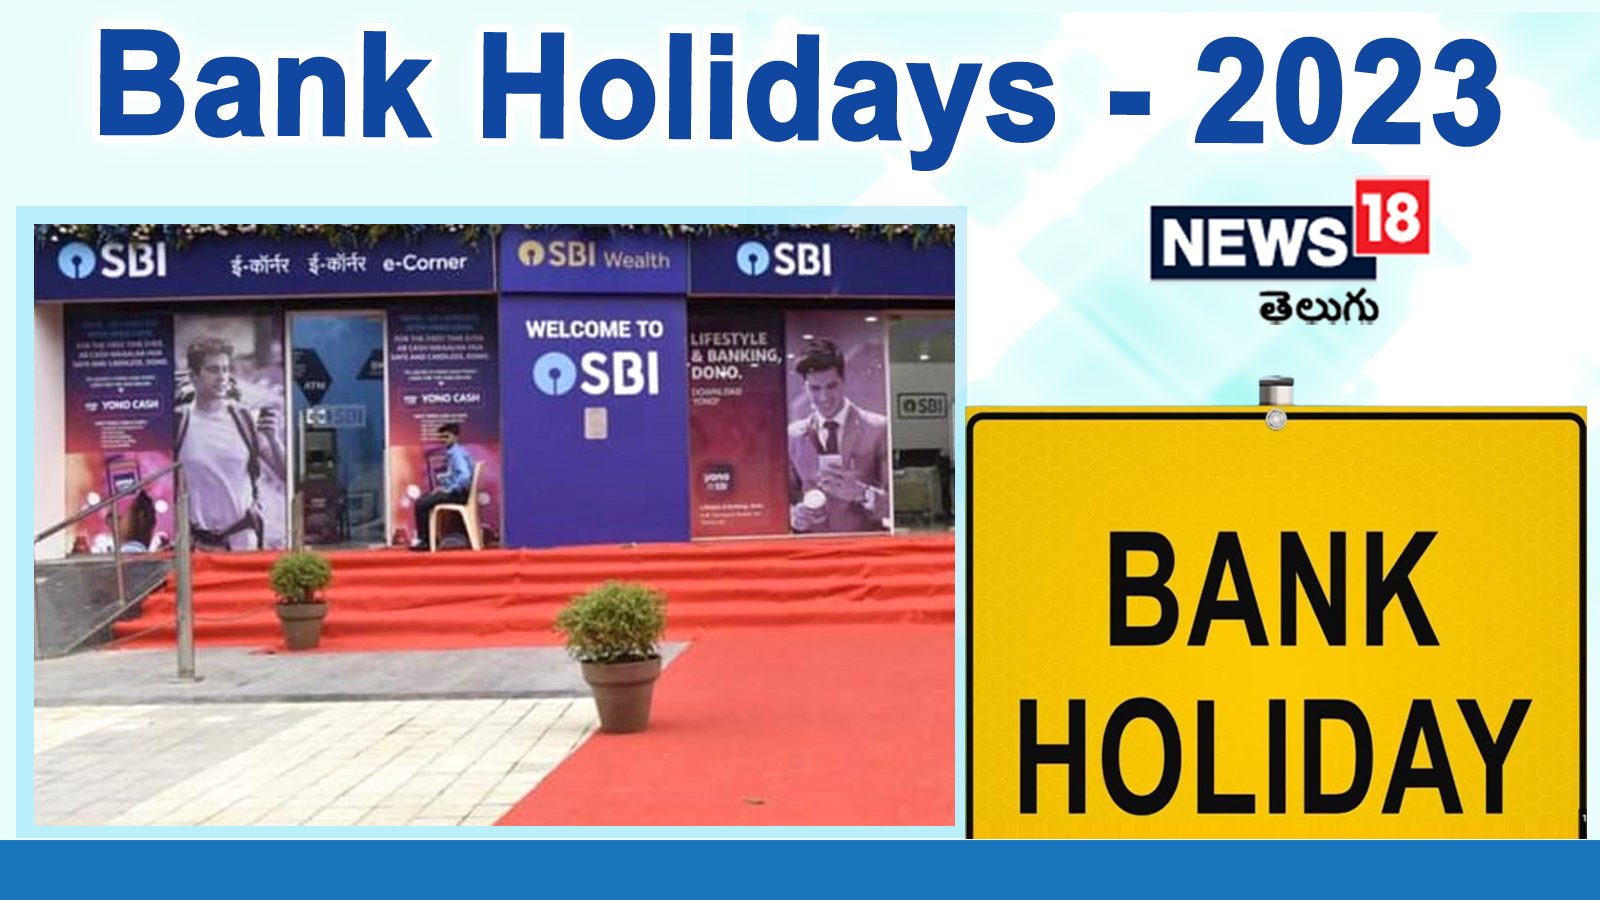 Reserve Bank of India announced Bank holidays list for the year of 2023